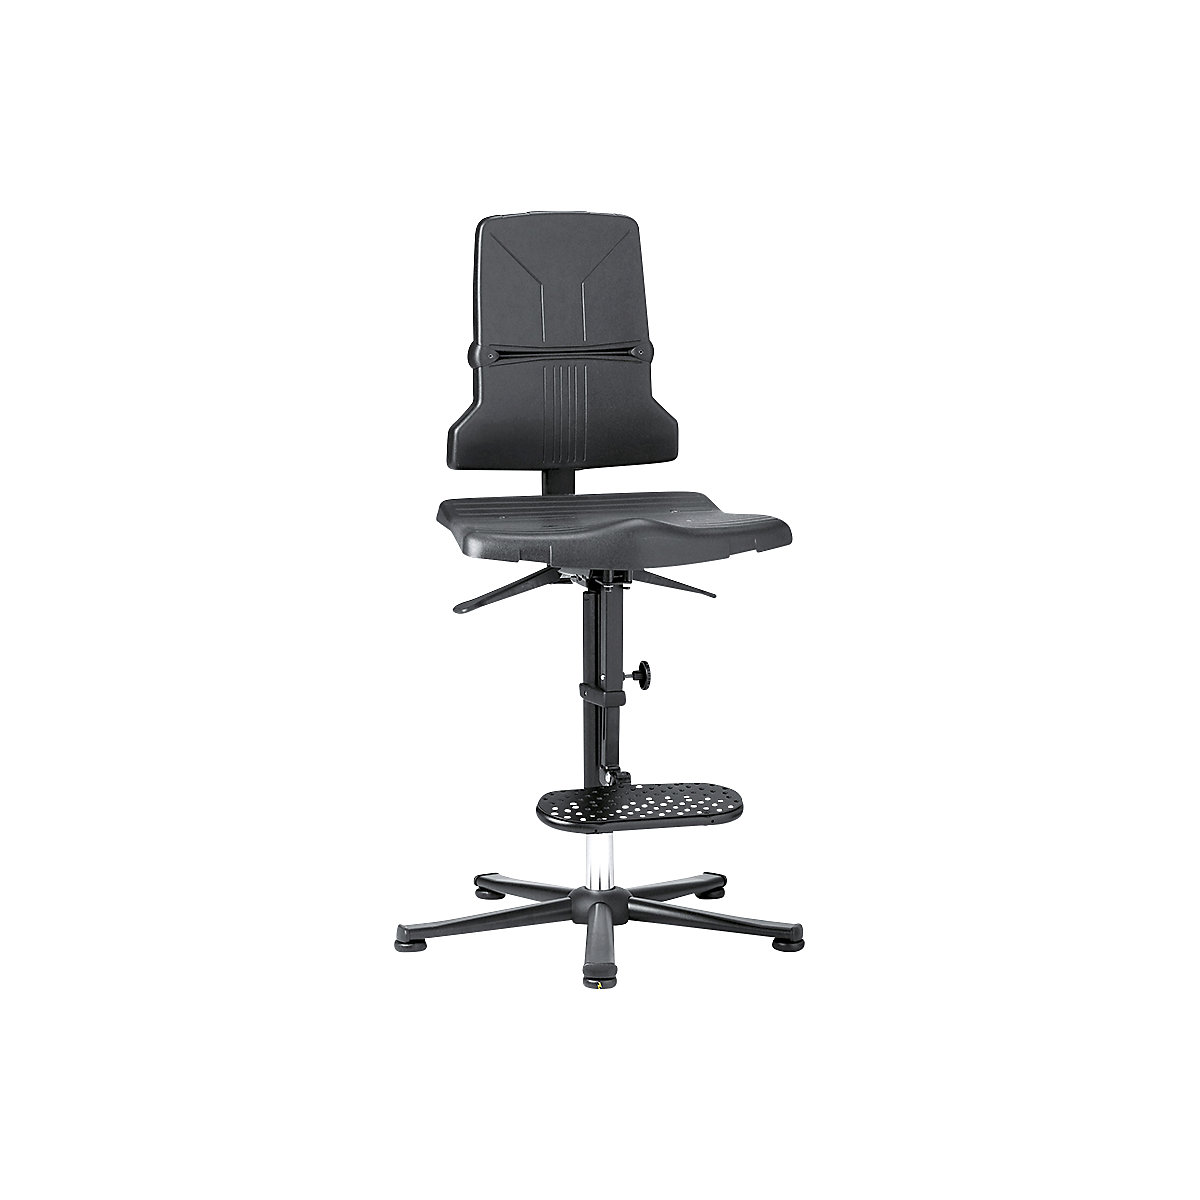 ESD SINTEC industrial swivel chair – bimos, with synchronous technology, with floor glides and step-up-2